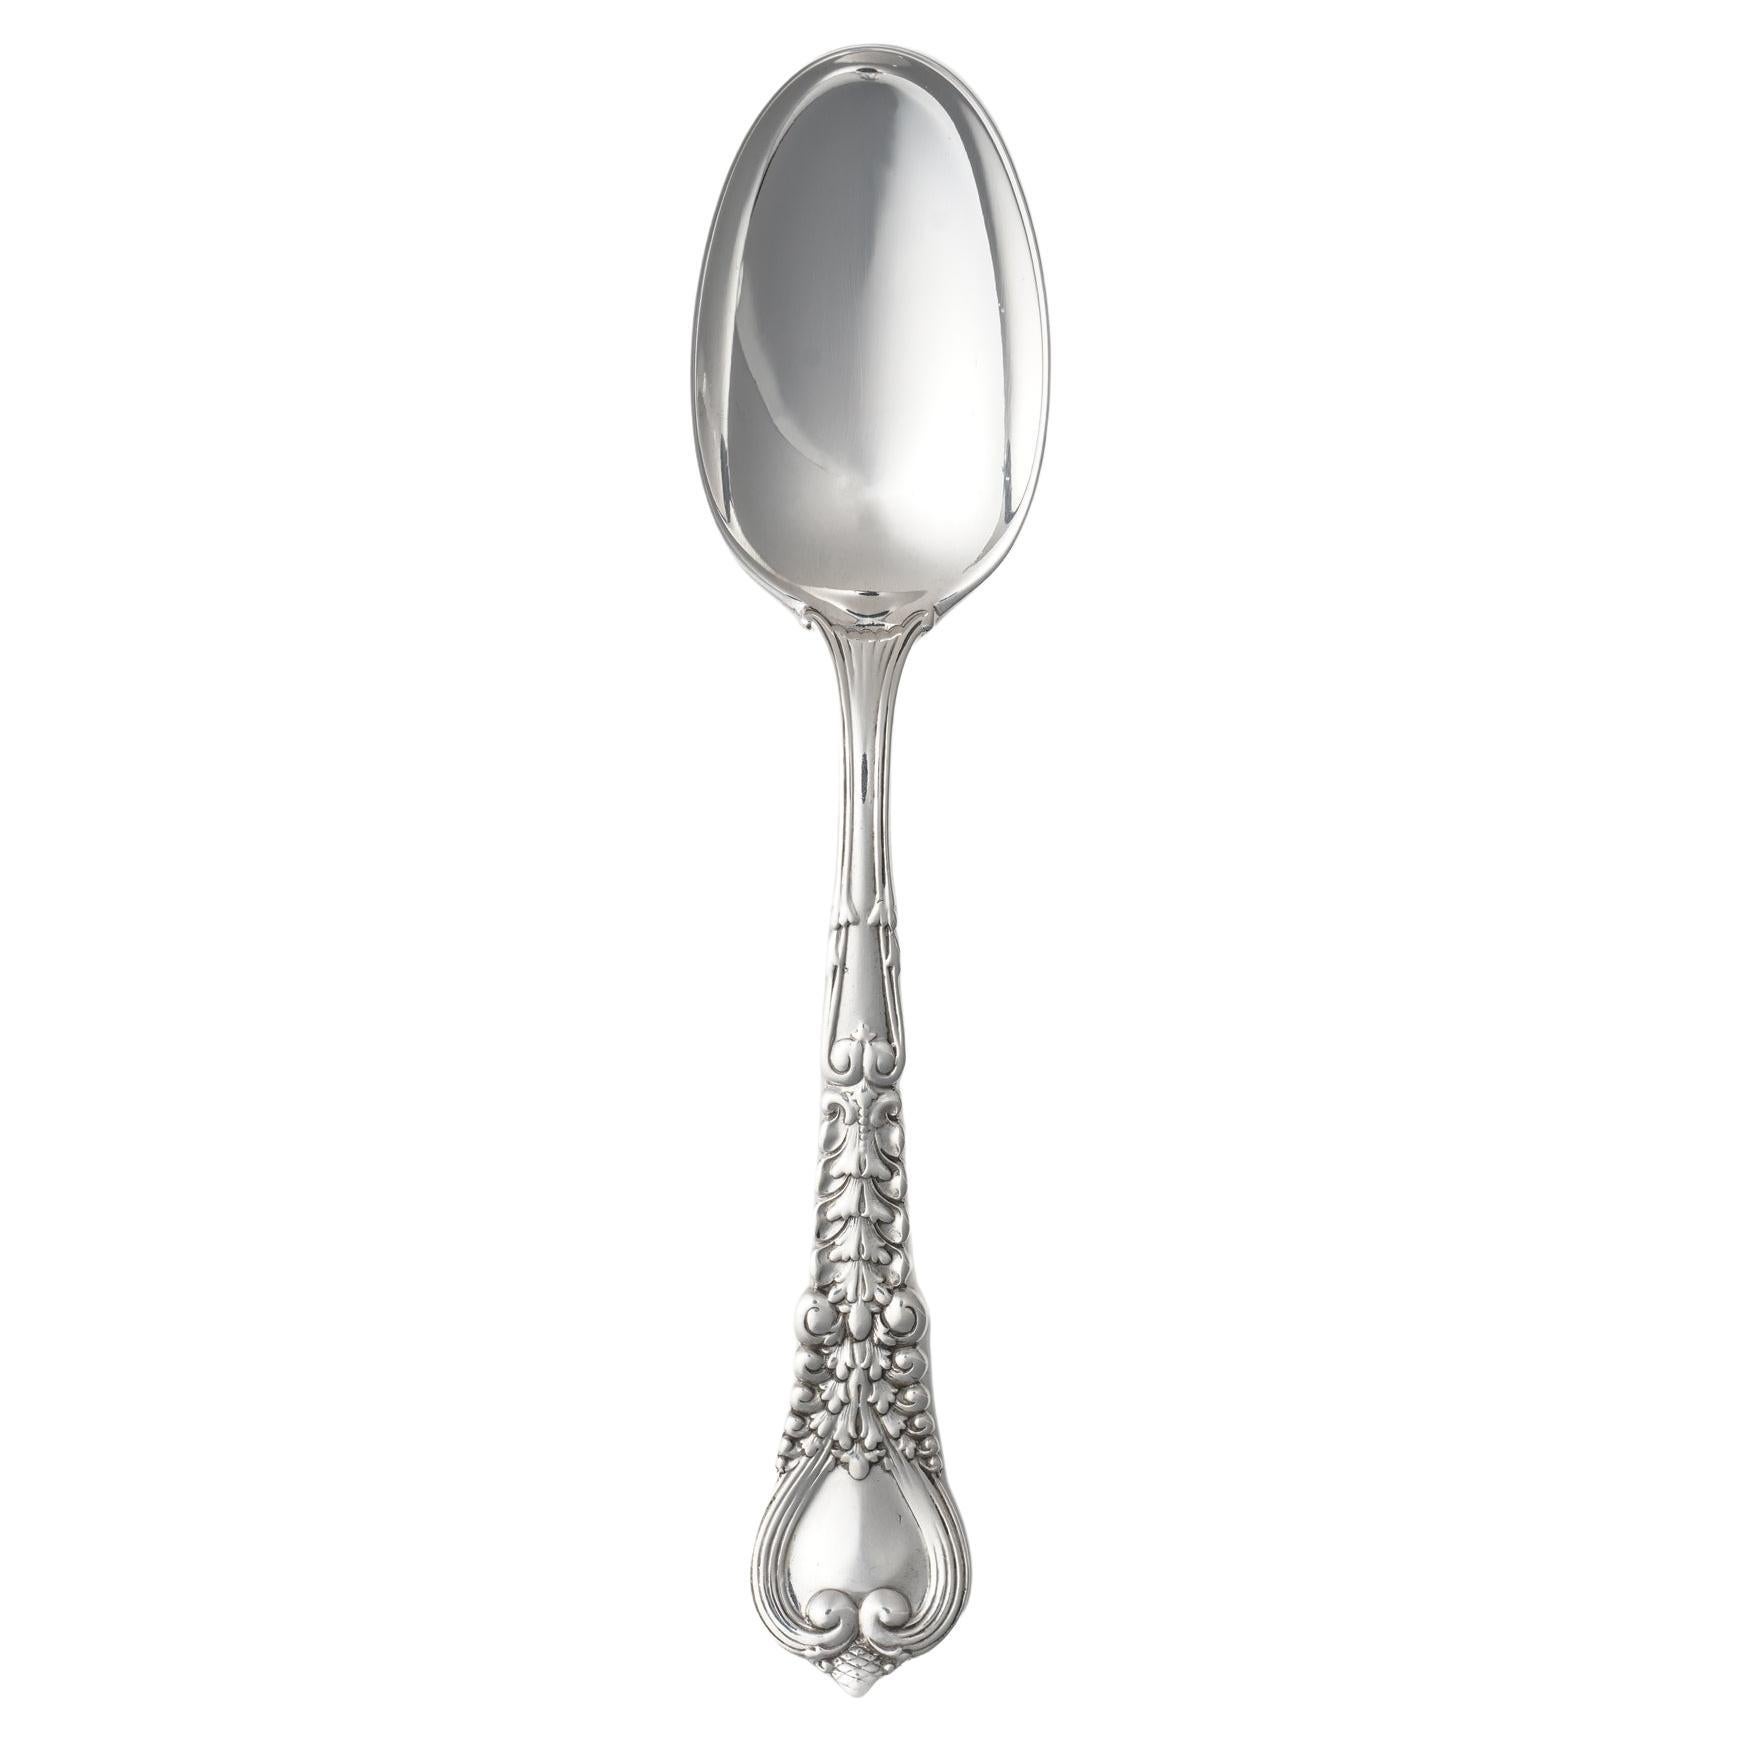 Antique Tiffany & Co. Sterling Silver Florentine Pattern Teaspoon For Sale